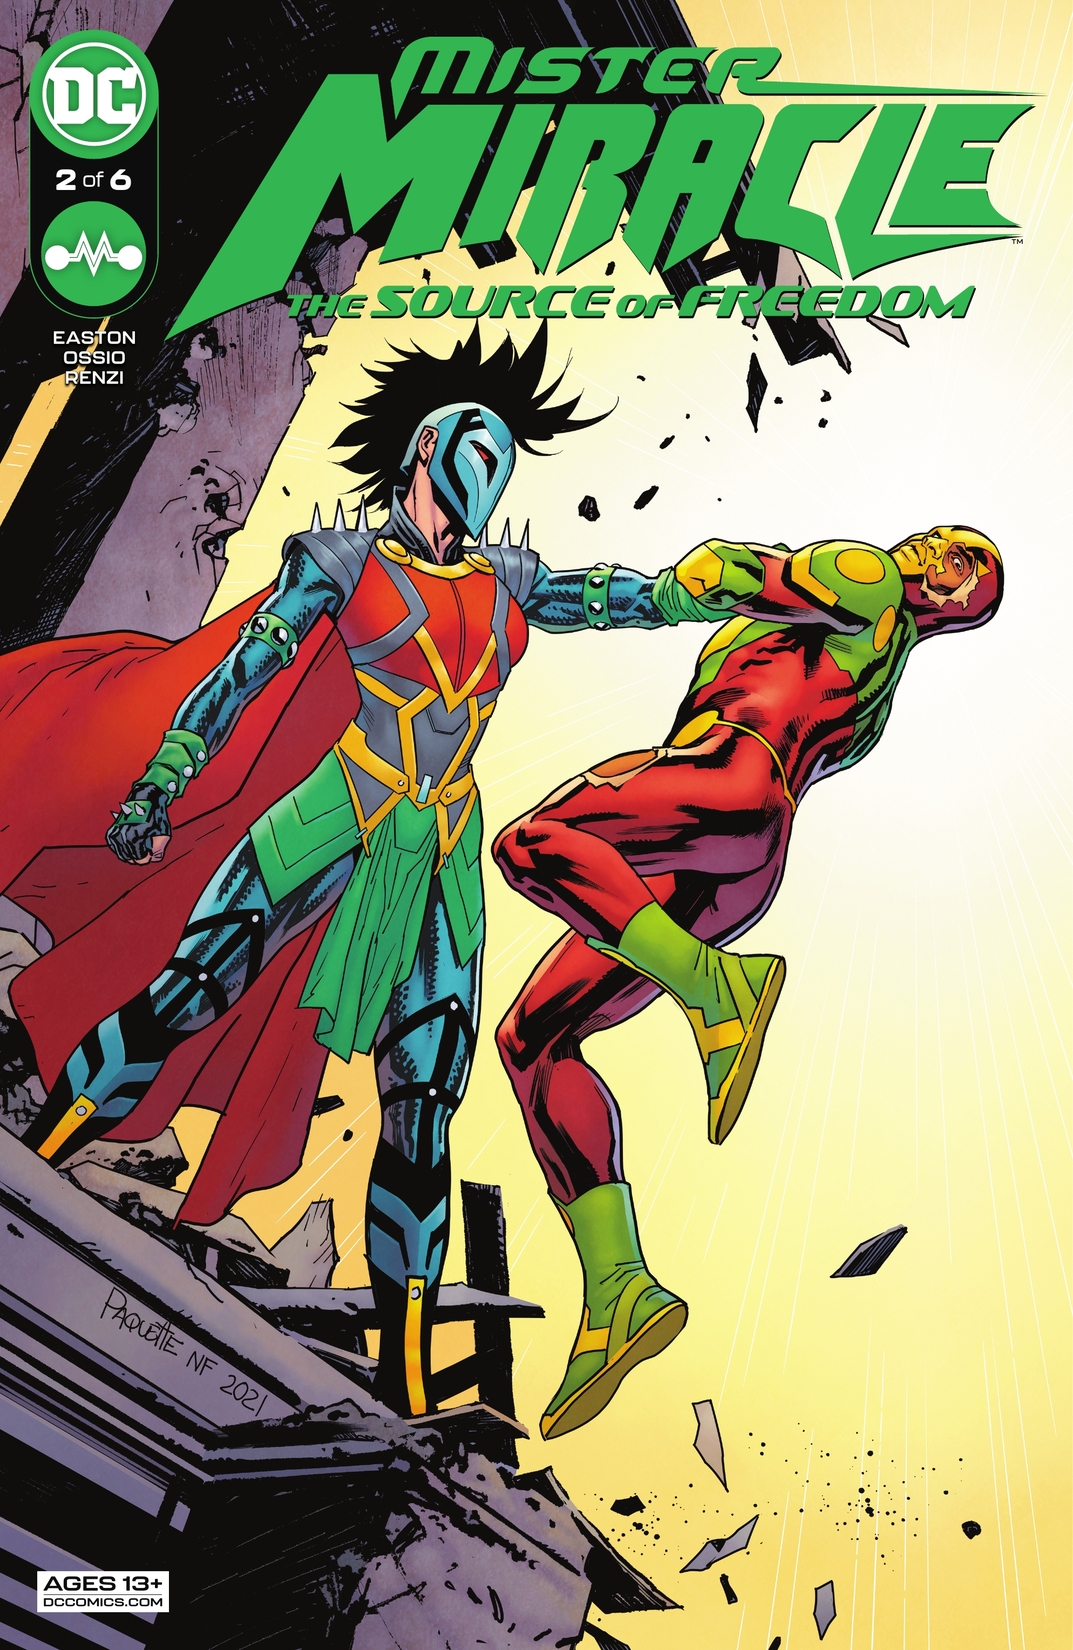 Mister Miracle: The Source of Freedom #2 preview images